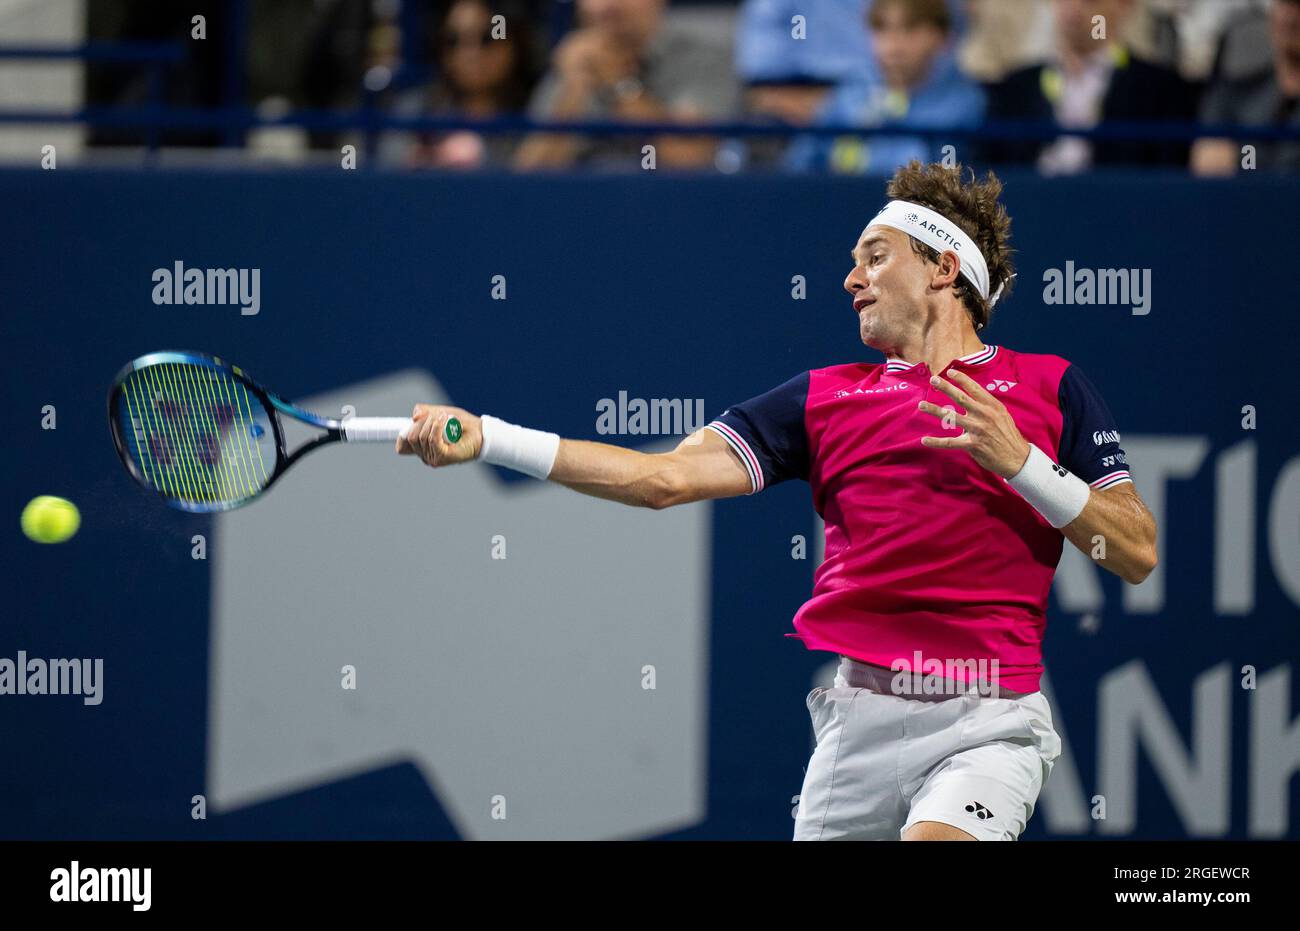 Toronto, Canada. 8th Aug, 2023. Casper Ruud competes during the men's singles second round match between Casper Ruud of Norway and Jiri Lehecka of the Czech Republic at the National Bank Open tennis tournament in Toronto, Canada, on Aug. 8, 2023. Credit: Zou Zheng/Xinhua/Alamy Live News Stock Photo